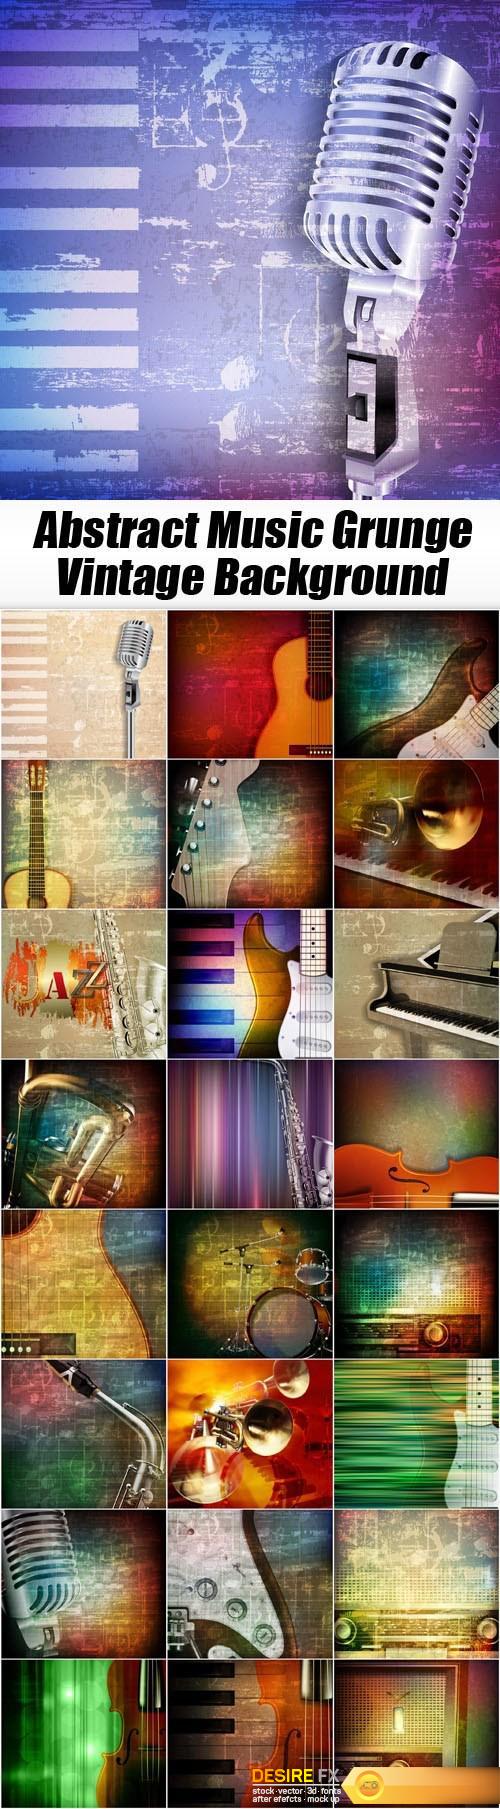 Abstract Music Grunge Vintage Background